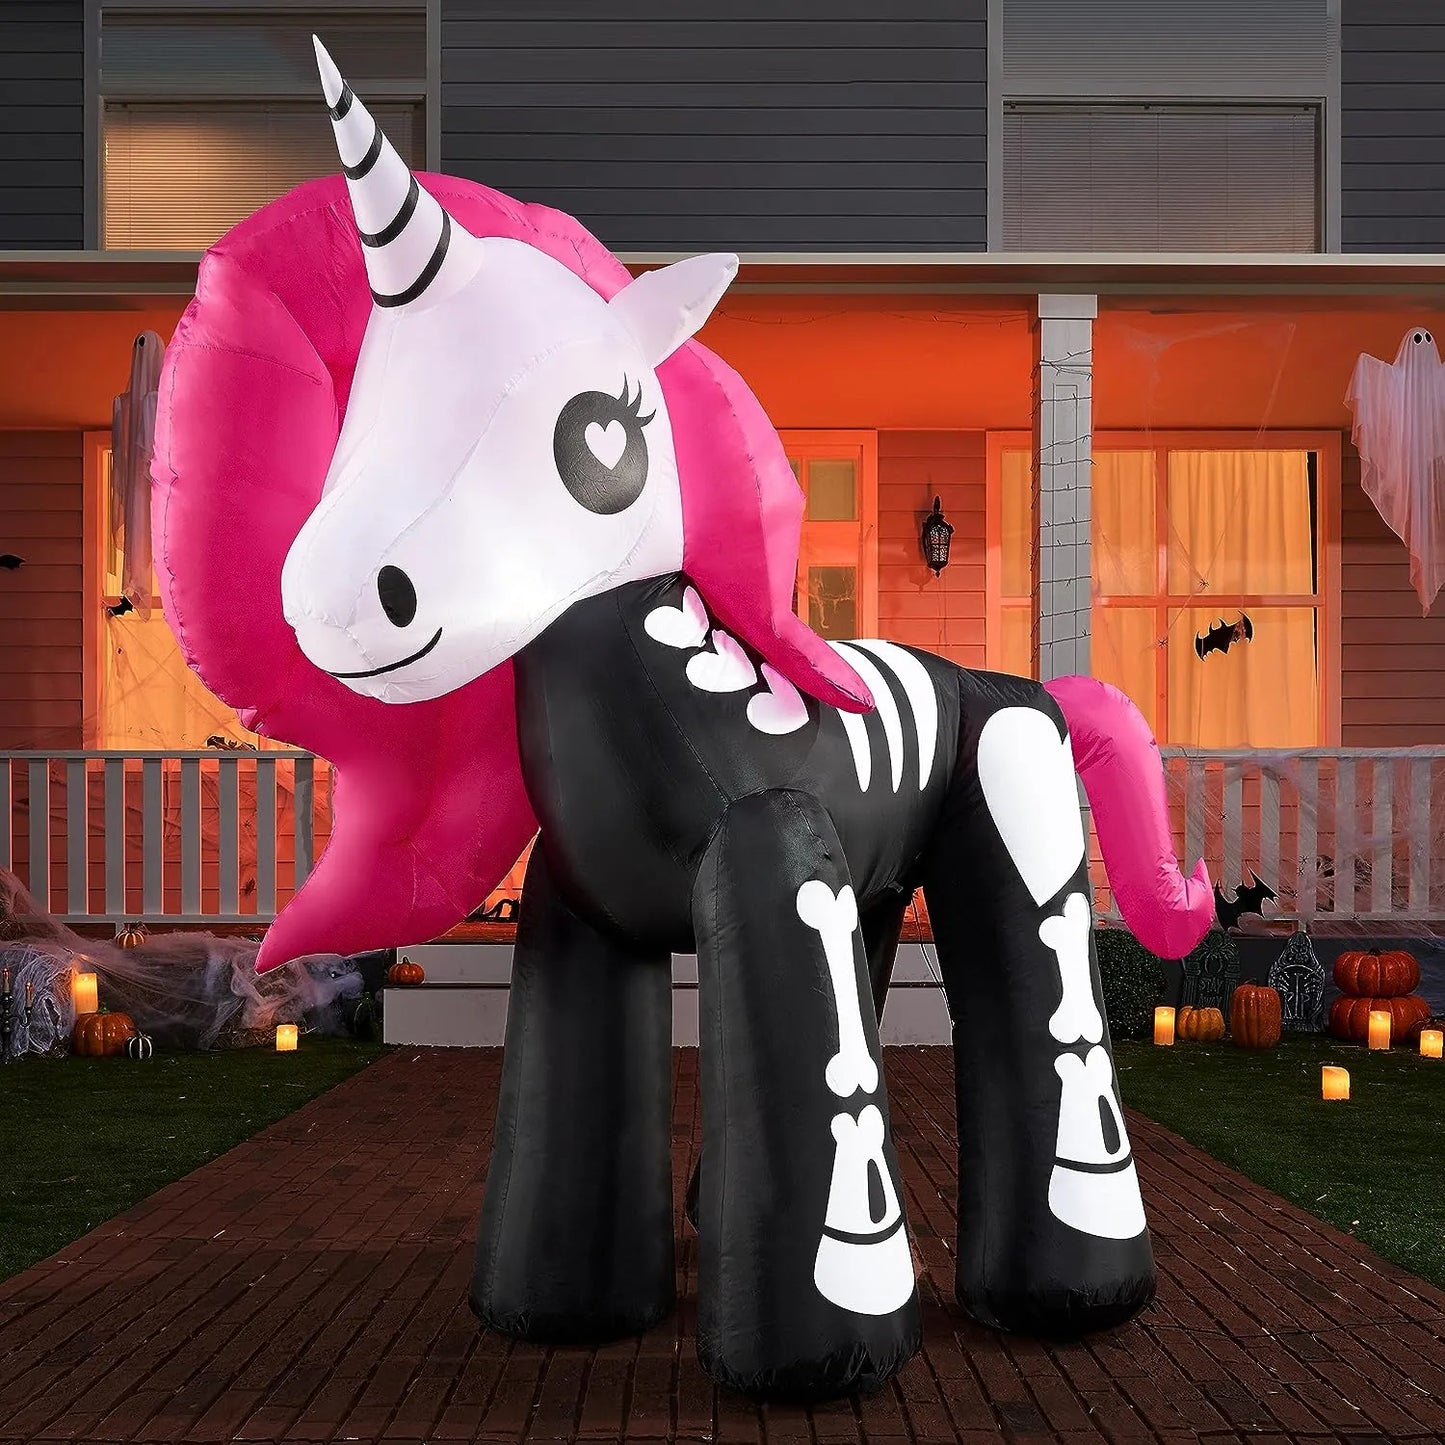 Joiedomi 6ft Long Halloween Inflatable Skeleton Unicorn with Built-in LEDs